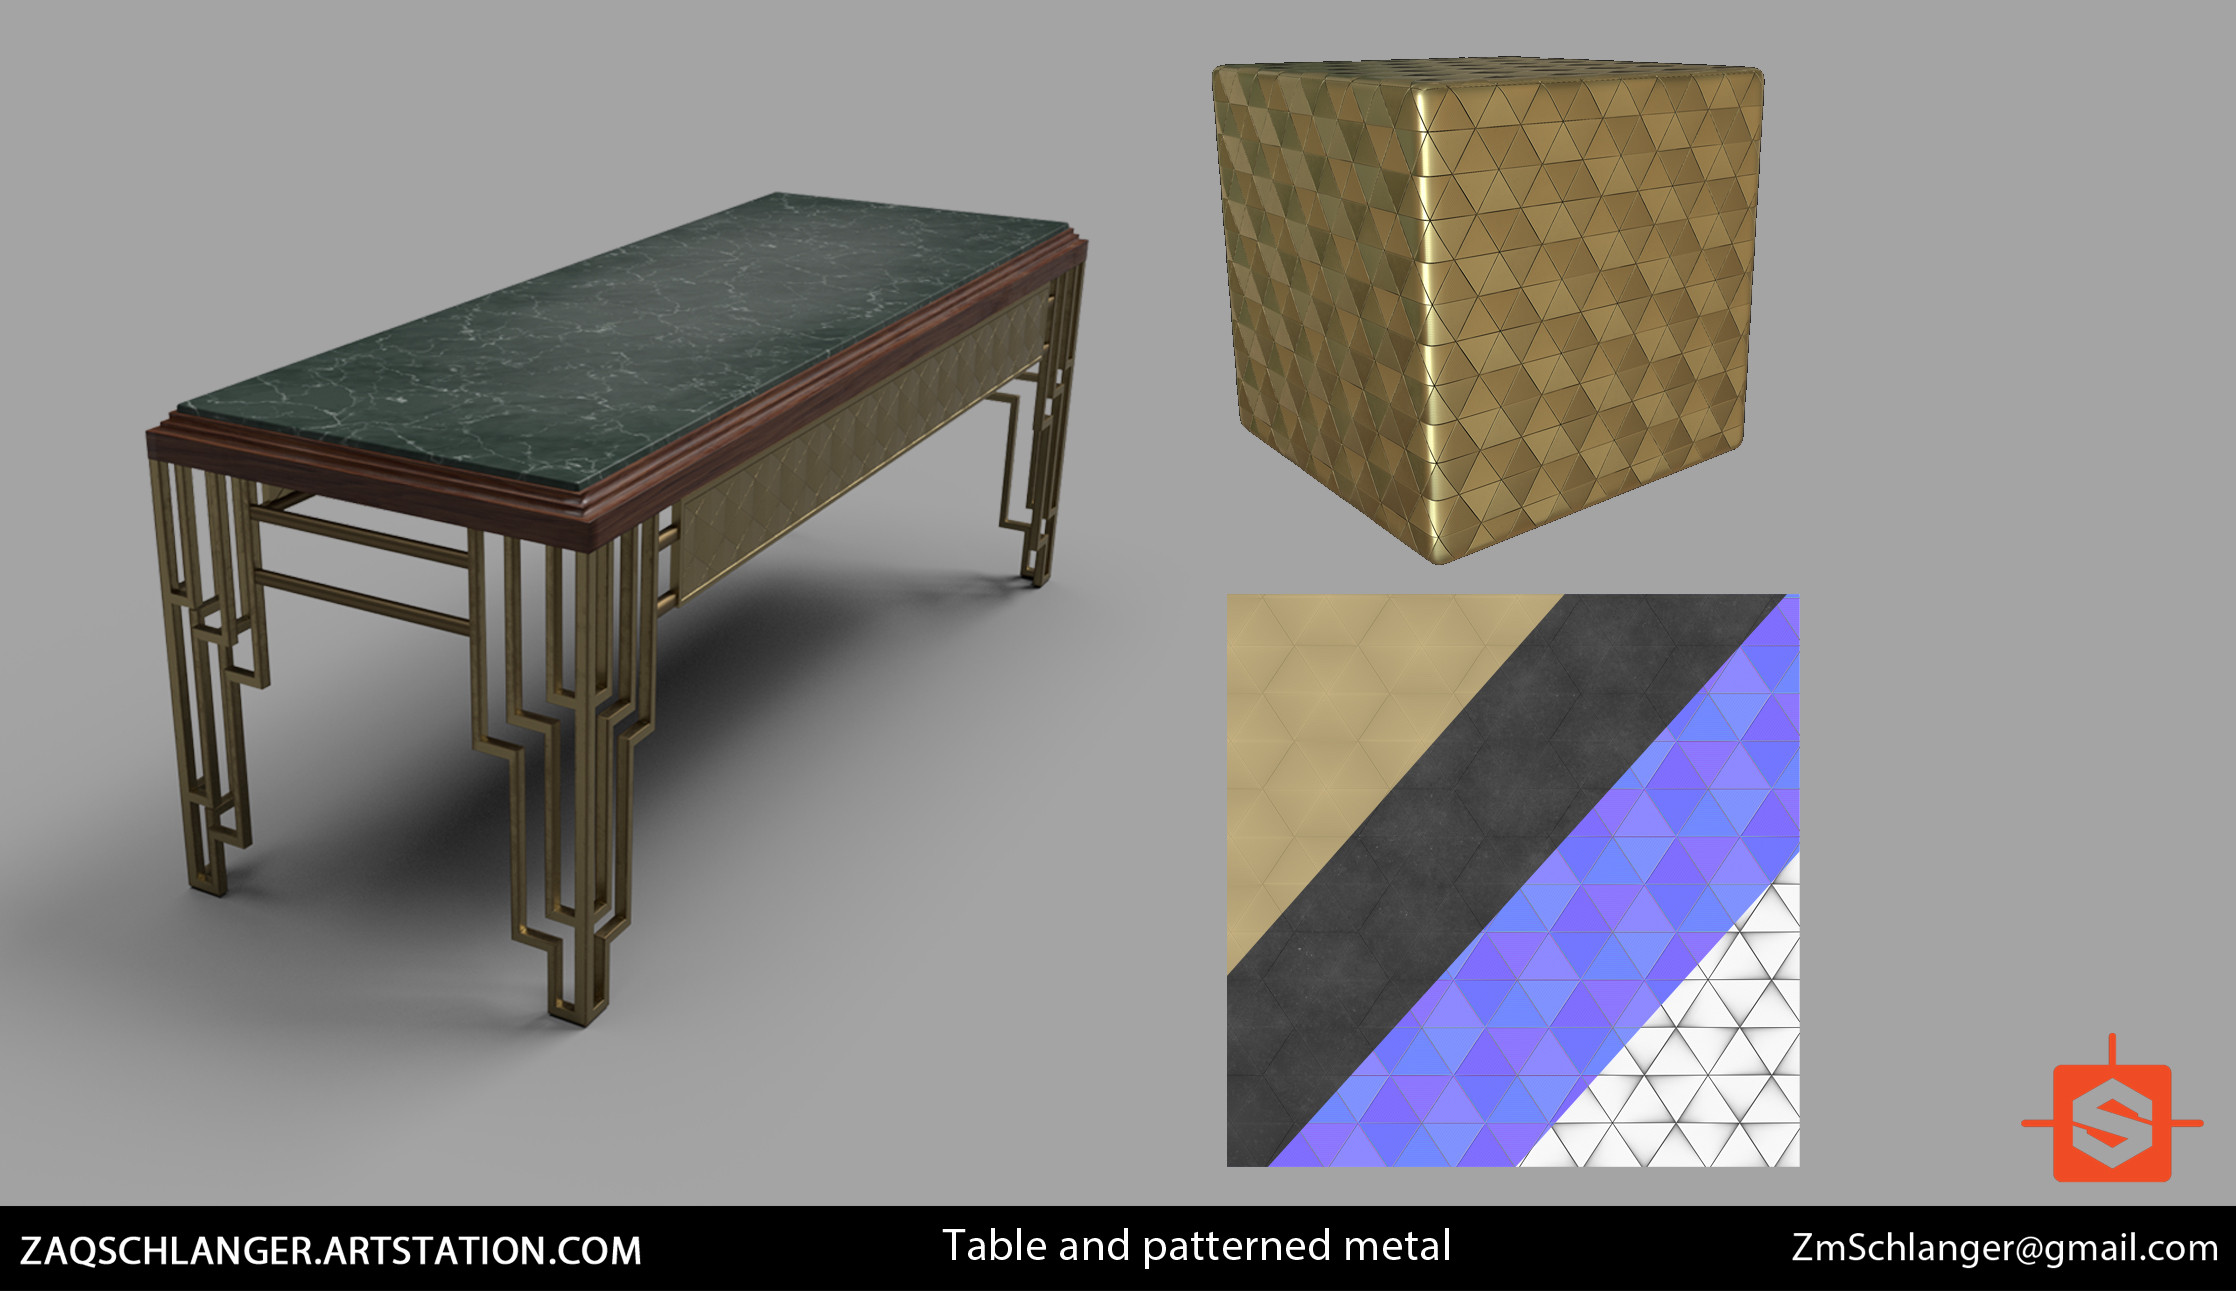 Fully procedural metallic pattern material made in Substance Designer 